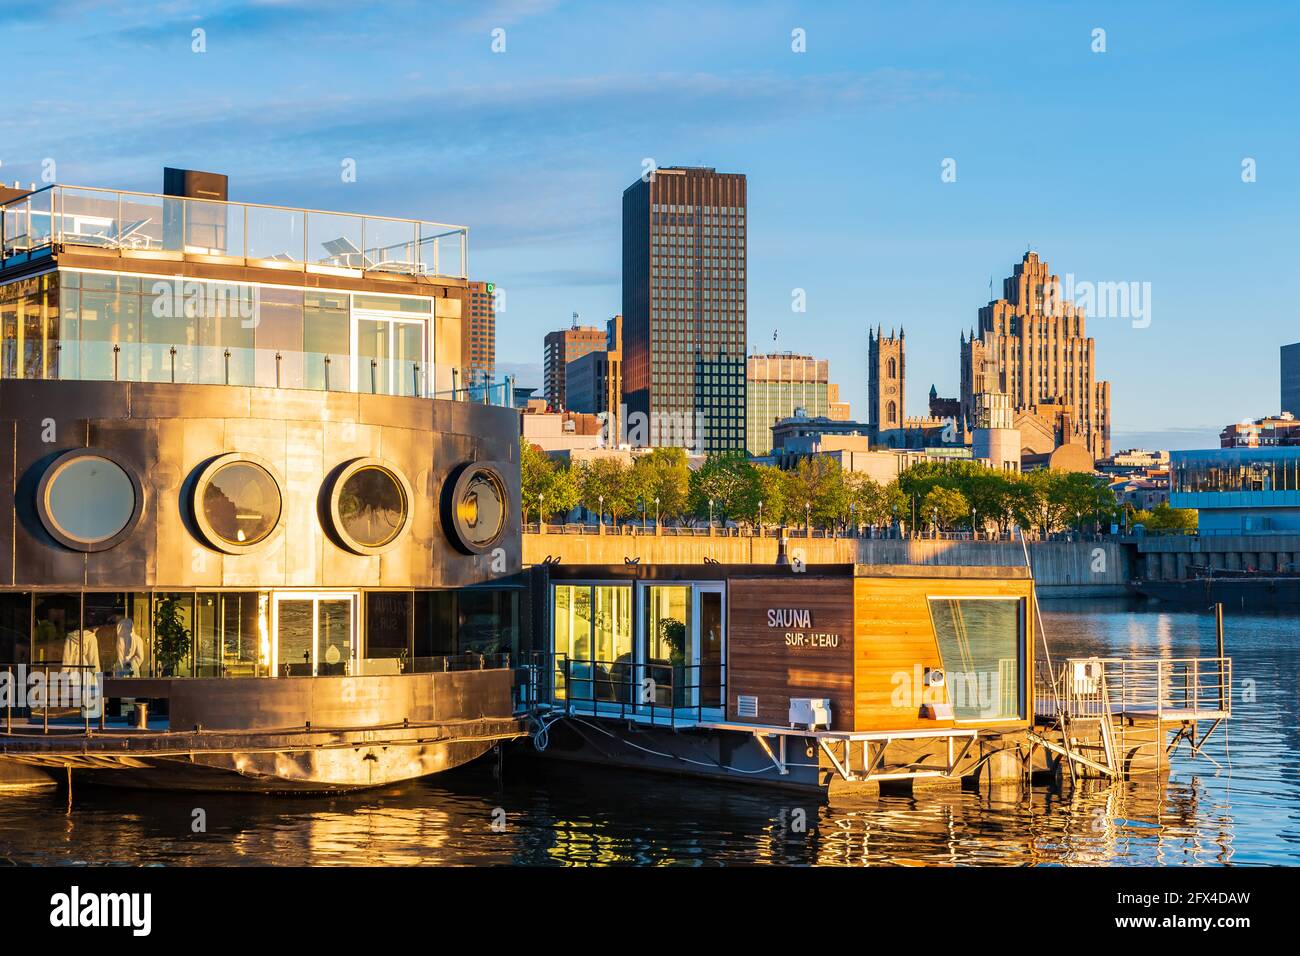 View of the Bota bota spa-sur-l'eau, a floating spa, located on a ship anchored in the Old Port of Montreal, Canada Stock Photo